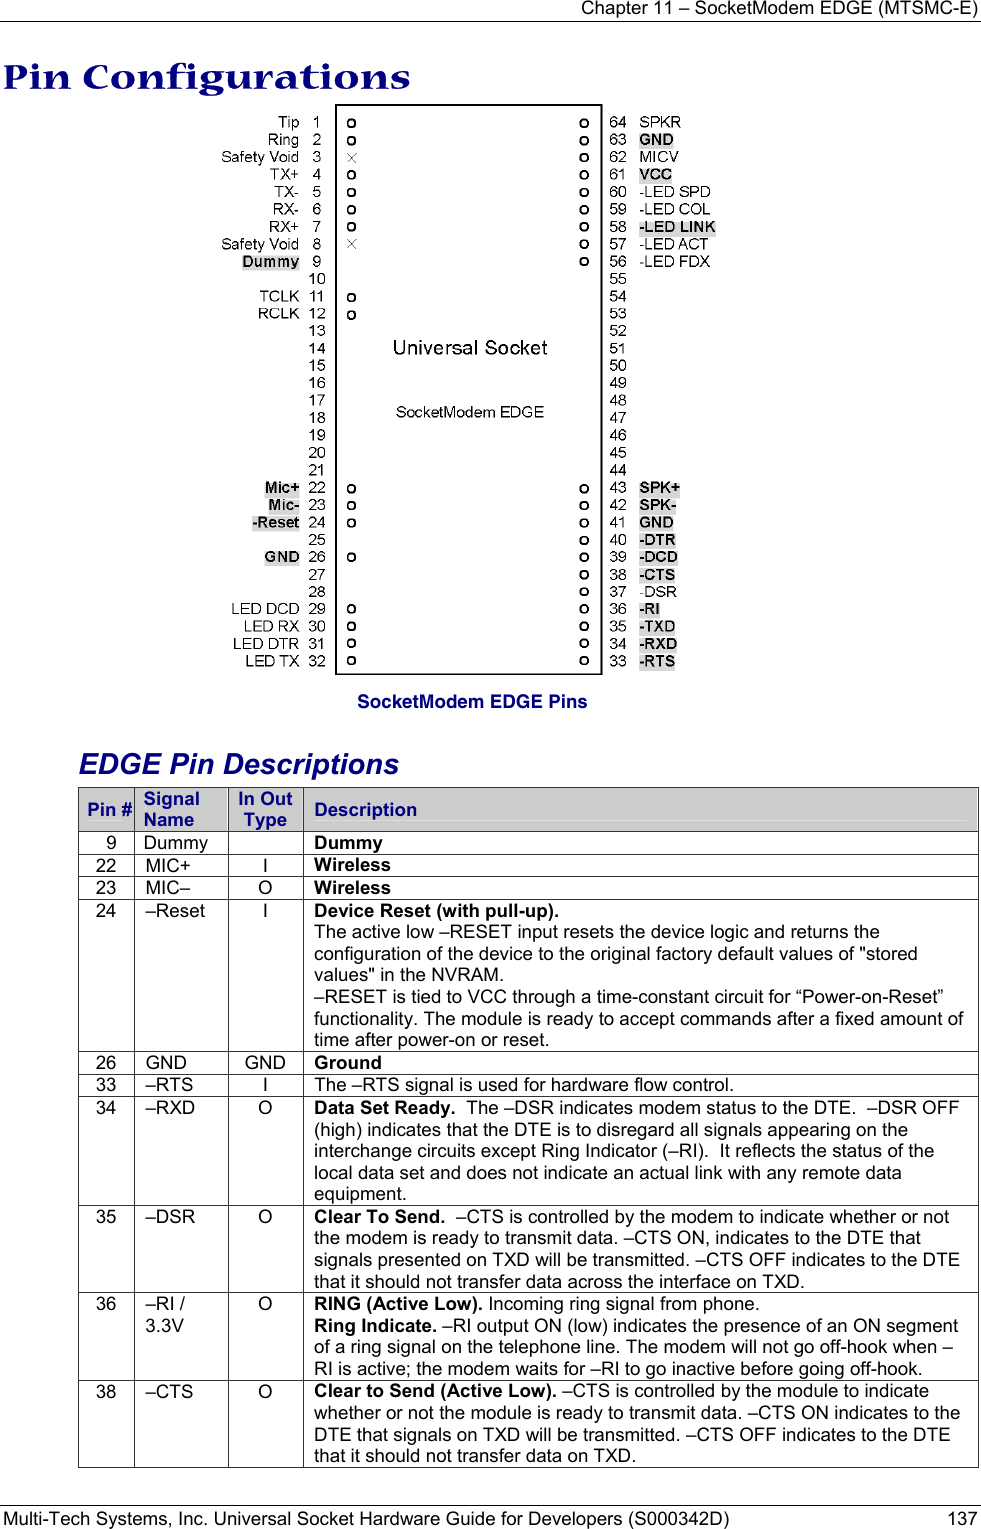 Chapter 11 – SocketModem EDGE (MTSMC-E) Multi-Tech Systems, Inc. Universal Socket Hardware Guide for Developers (S000342D)  137 Pin Configurations                                   SocketModem EDGE Pins  EDGE Pin Descriptions Pin #  Signal Name In Out Type  Description   9  Dummy    Dummy 22 MIC+  I  Wireless 23 MIC–  O  Wireless  24 –Reset  I  Device Reset (with pull-up).  The active low –RESET input resets the device logic and returns the configuration of the device to the original factory default values of &quot;stored values&quot; in the NVRAM. –RESET is tied to VCC through a time-constant circuit for “Power-on-Reset” functionality. The module is ready to accept commands after a fixed amount of time after power-on or reset.   26 GND  GND Ground 33 –RTS  I  The –RTS signal is used for hardware flow control. 34 –RXD  O  Data Set Ready.  The –DSR indicates modem status to the DTE.  –DSR OFF (high) indicates that the DTE is to disregard all signals appearing on the interchange circuits except Ring Indicator (–RI).  It reflects the status of the local data set and does not indicate an actual link with any remote data equipment. 35 –DSR  O  Clear To Send.  –CTS is controlled by the modem to indicate whether or not the modem is ready to transmit data. –CTS ON, indicates to the DTE that signals presented on TXD will be transmitted. –CTS OFF indicates to the DTE that it should not transfer data across the interface on TXD. 36 –RI / 3.3V O  RING (Active Low). Incoming ring signal from phone.  Ring Indicate. –RI output ON (low) indicates the presence of an ON segment of a ring signal on the telephone line. The modem will not go off-hook when –RI is active; the modem waits for –RI to go inactive before going off-hook. 38 –CTS  O  Clear to Send (Active Low). –CTS is controlled by the module to indicate whether or not the module is ready to transmit data. –CTS ON indicates to the DTE that signals on TXD will be transmitted. –CTS OFF indicates to the DTE that it should not transfer data on TXD.  